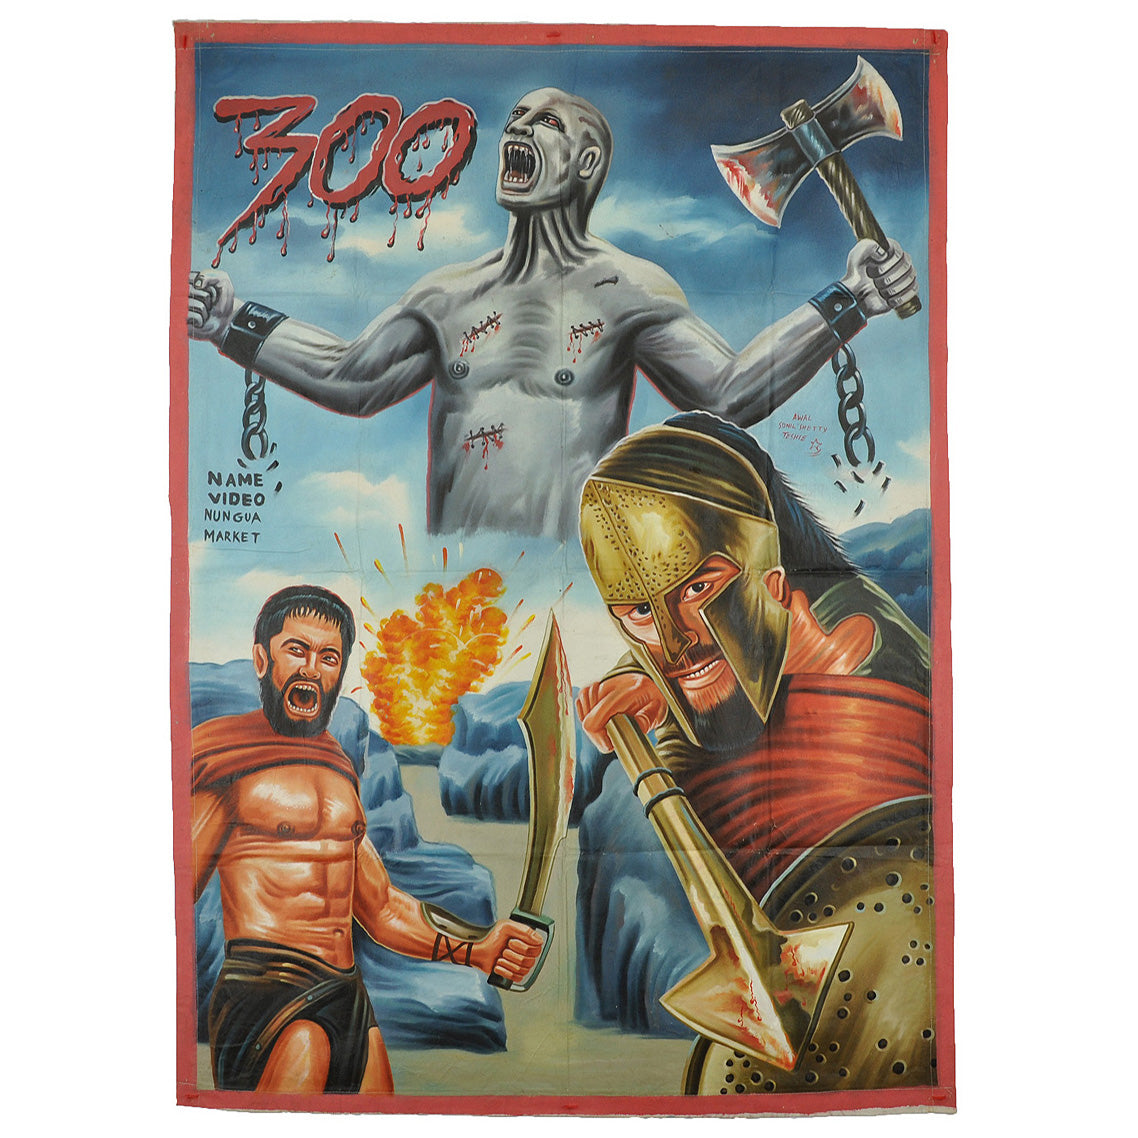 300 movie poster hand painted in Ghana West Africa for the local cinema